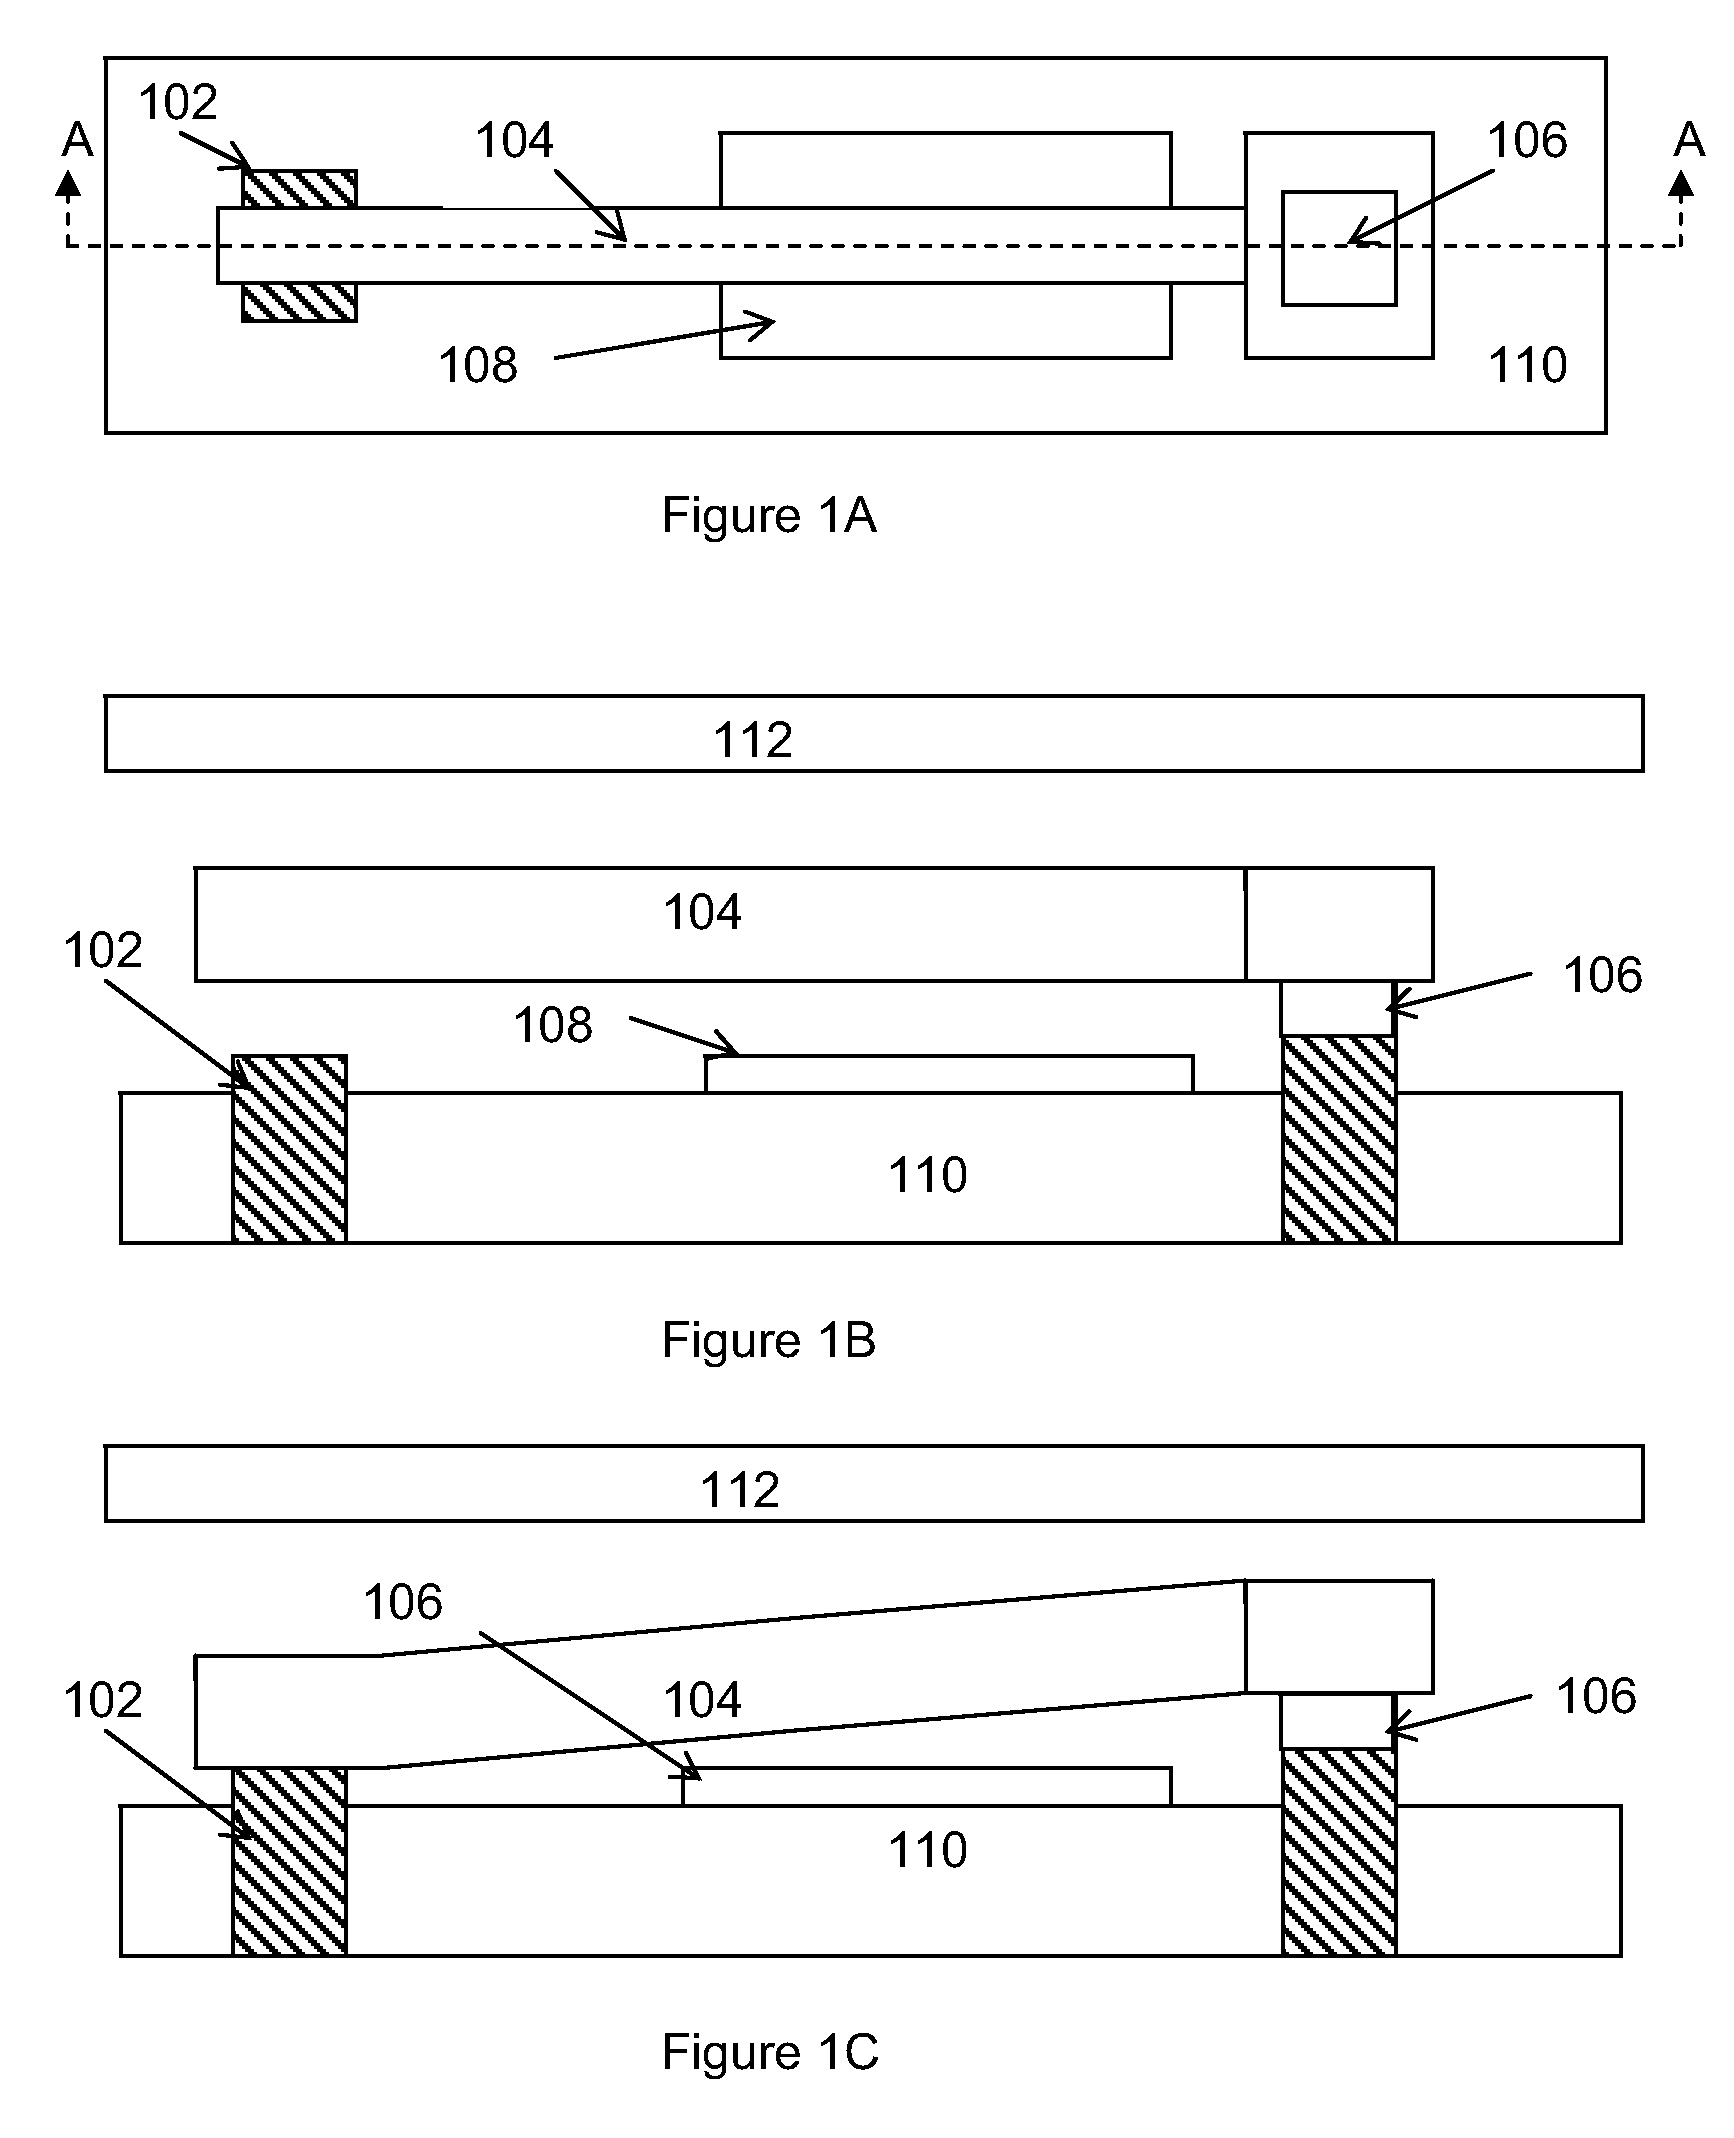 Moving a free-standing structure between high and low adhesion states